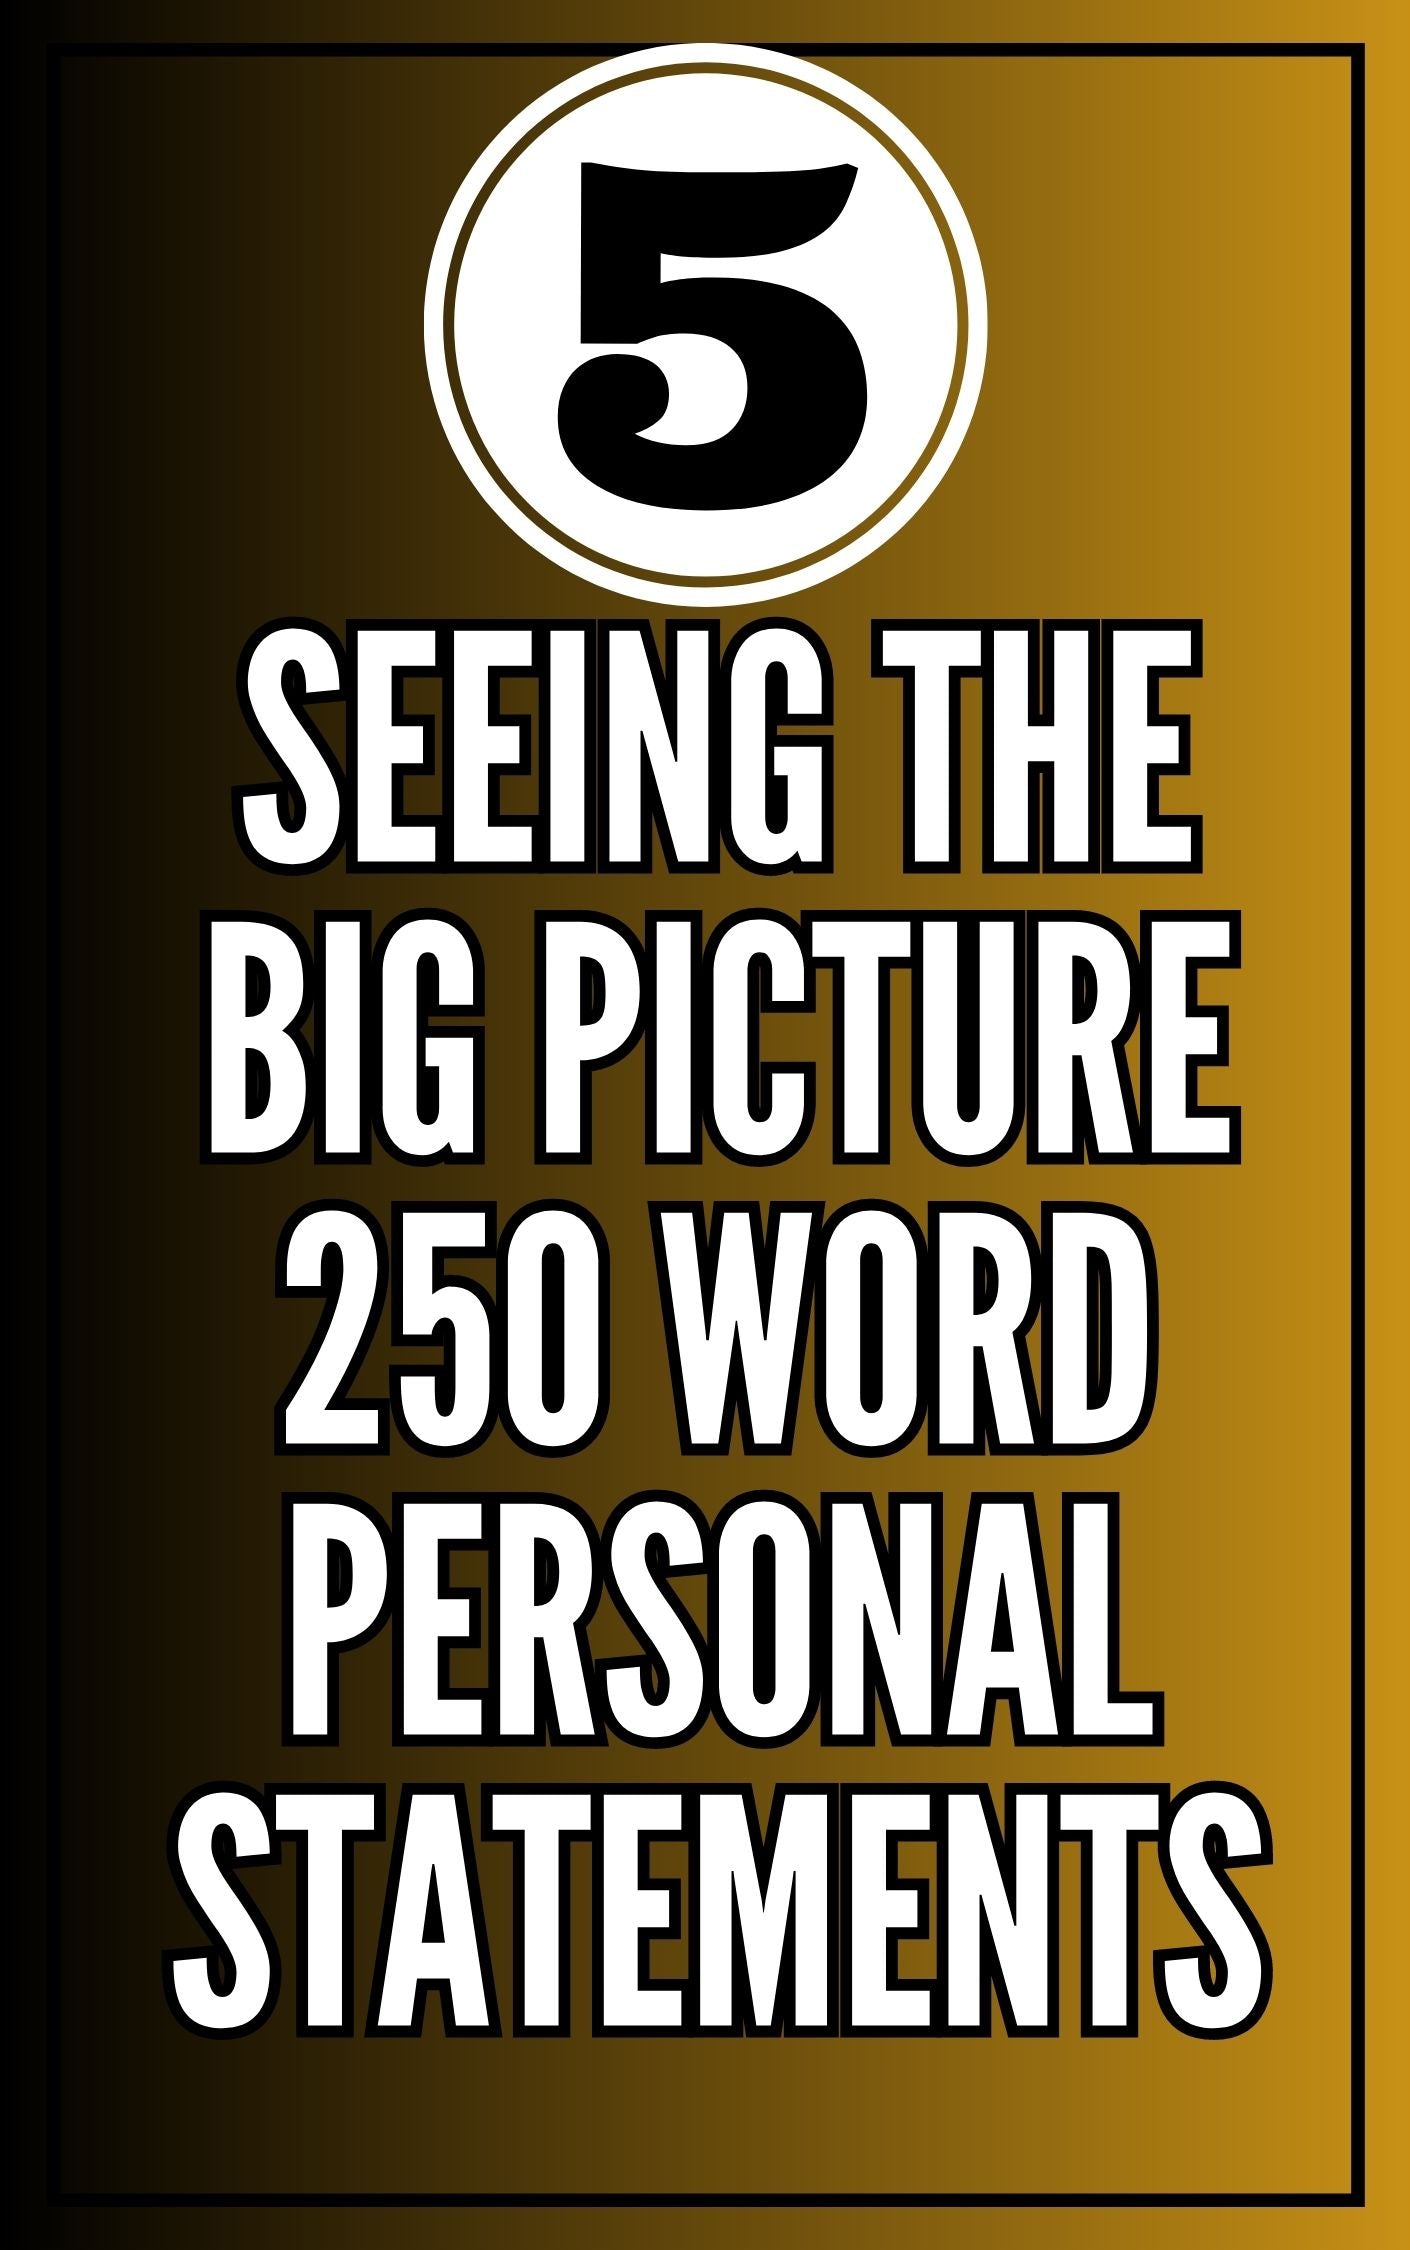 'Seeing the Big Picture' - 250 Word Statement Examples